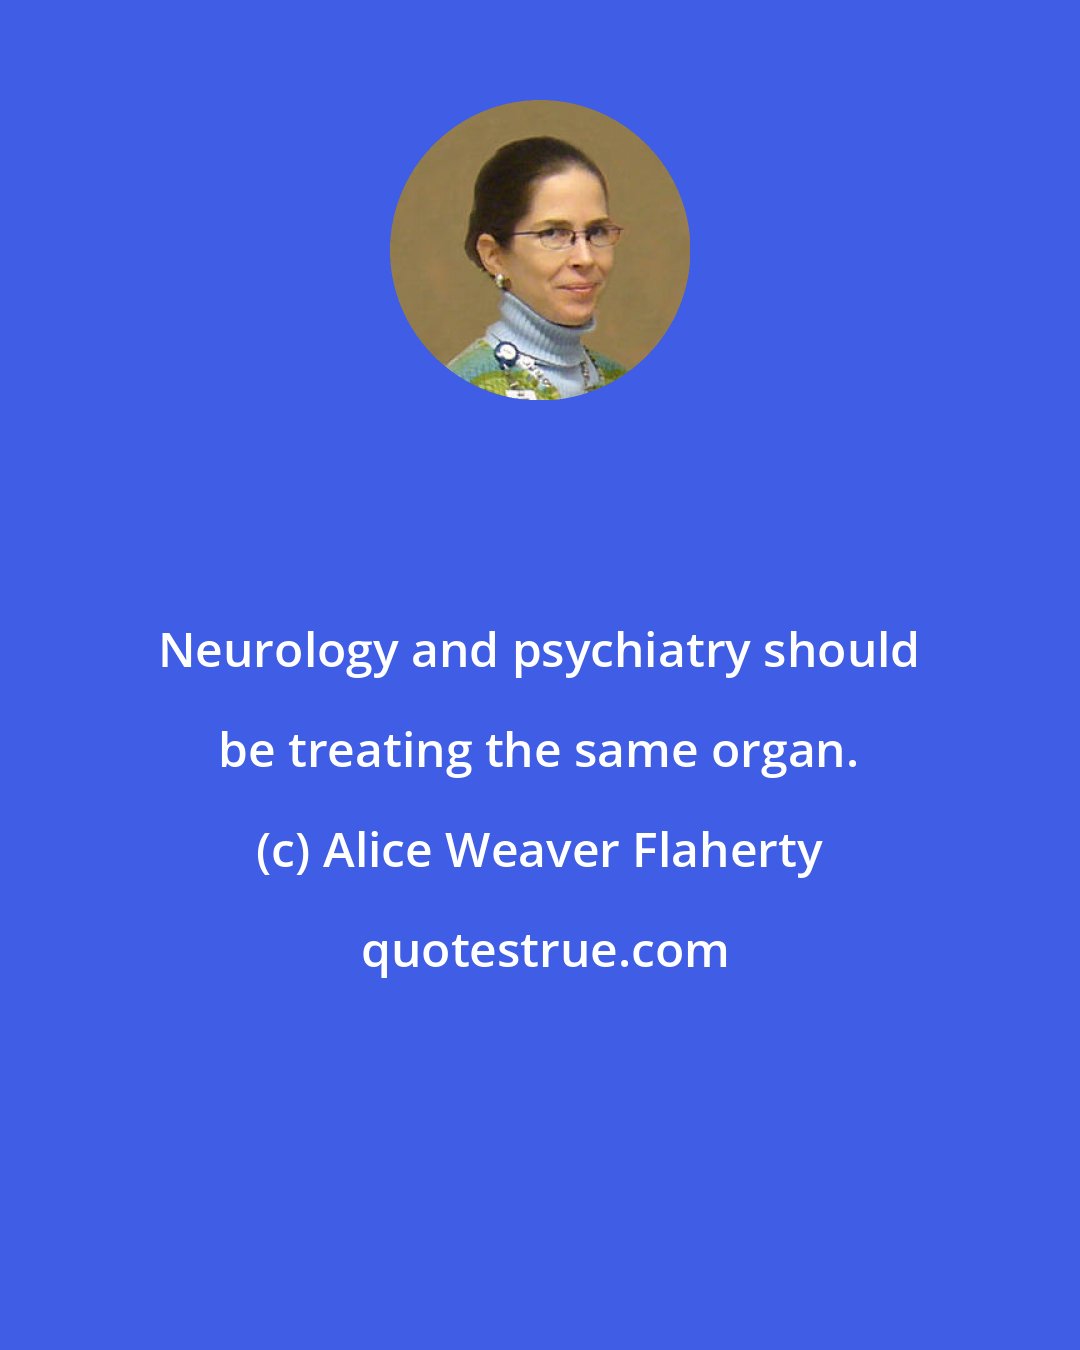 Alice Weaver Flaherty: Neurology and psychiatry should be treating the same organ.